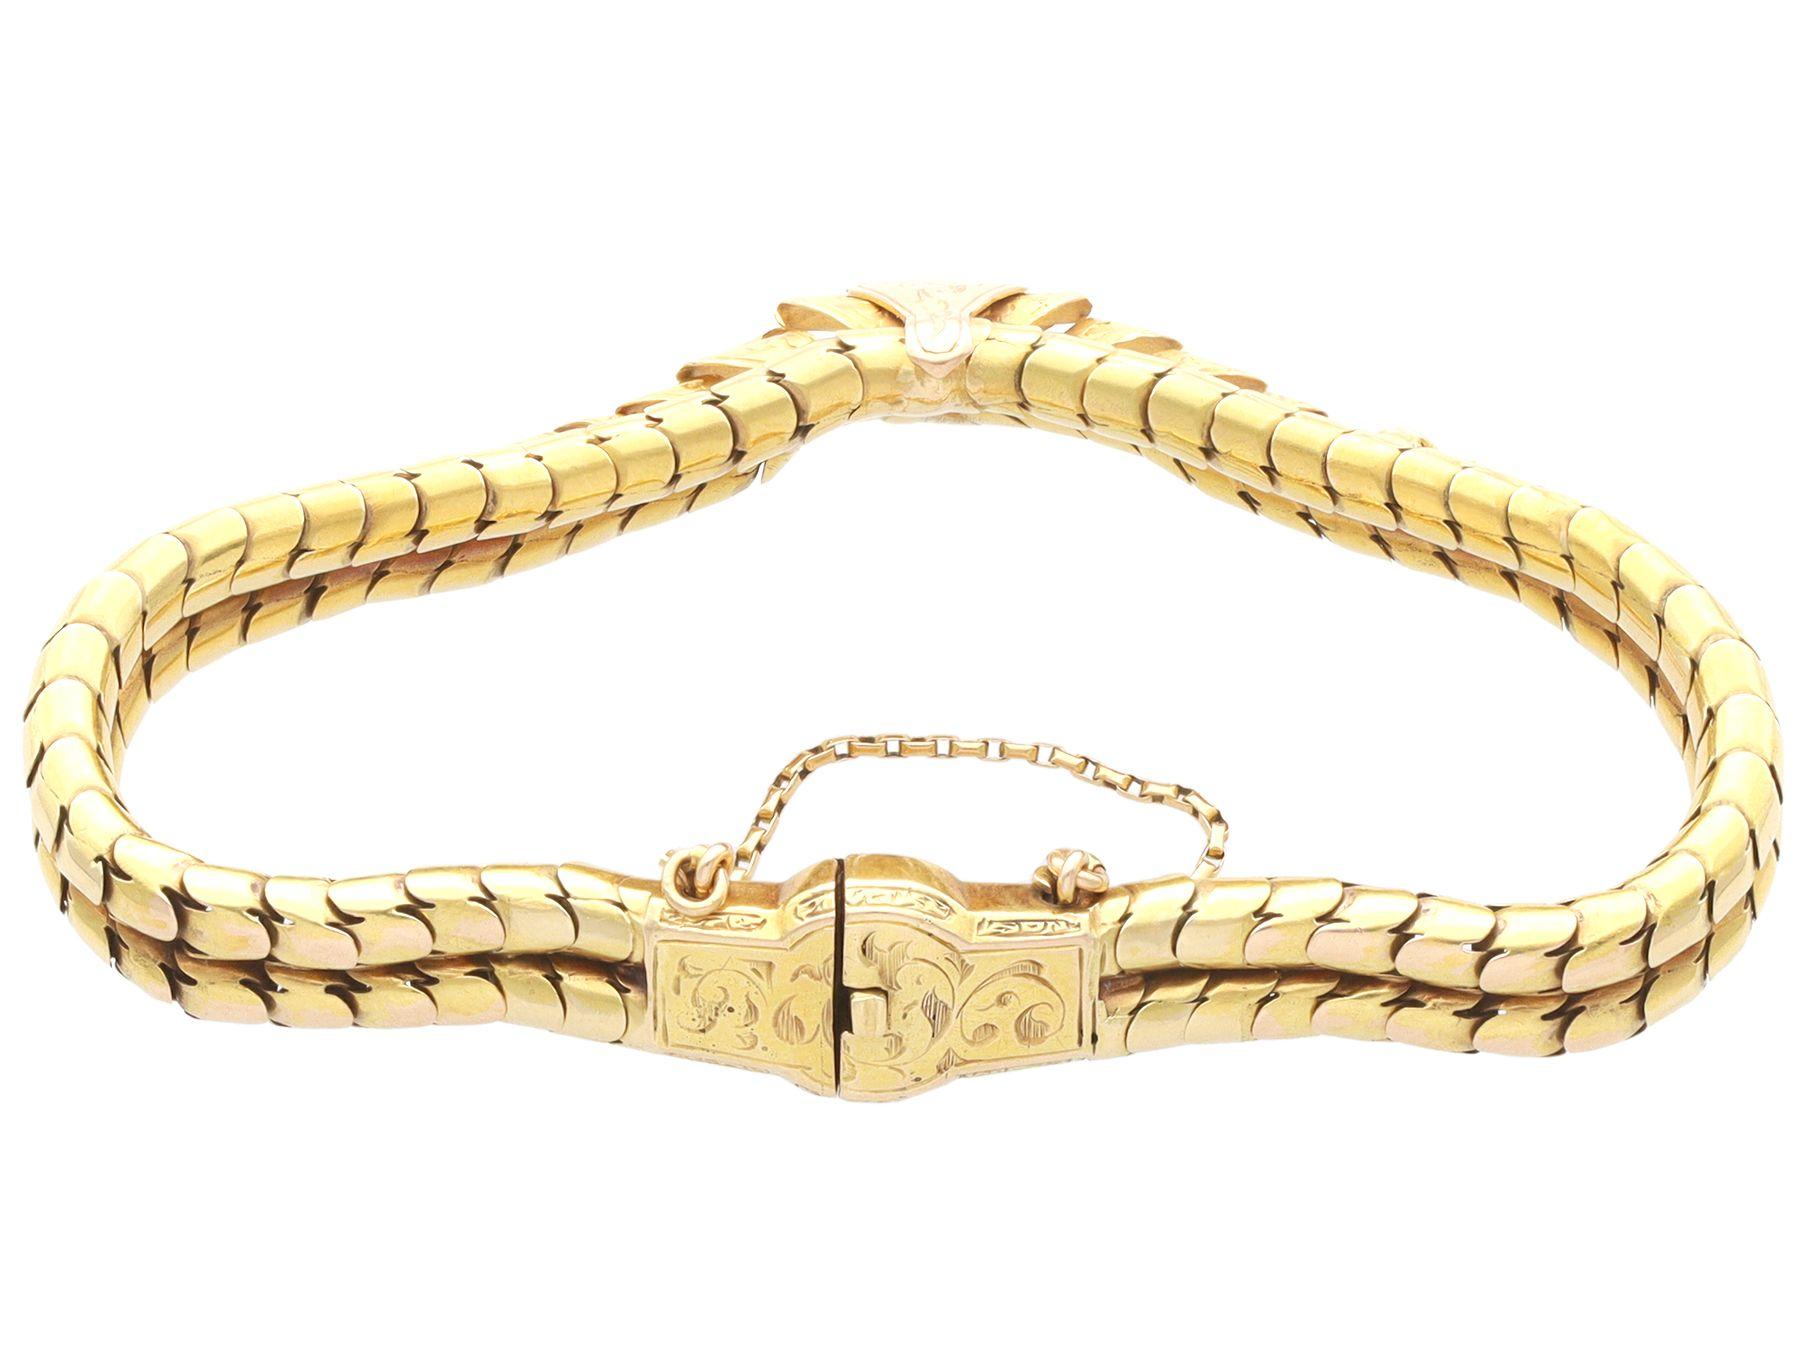 Antique 18k Yellow Gold Bracelet by Hunt & Rosell In Excellent Condition For Sale In Jesmond, Newcastle Upon Tyne